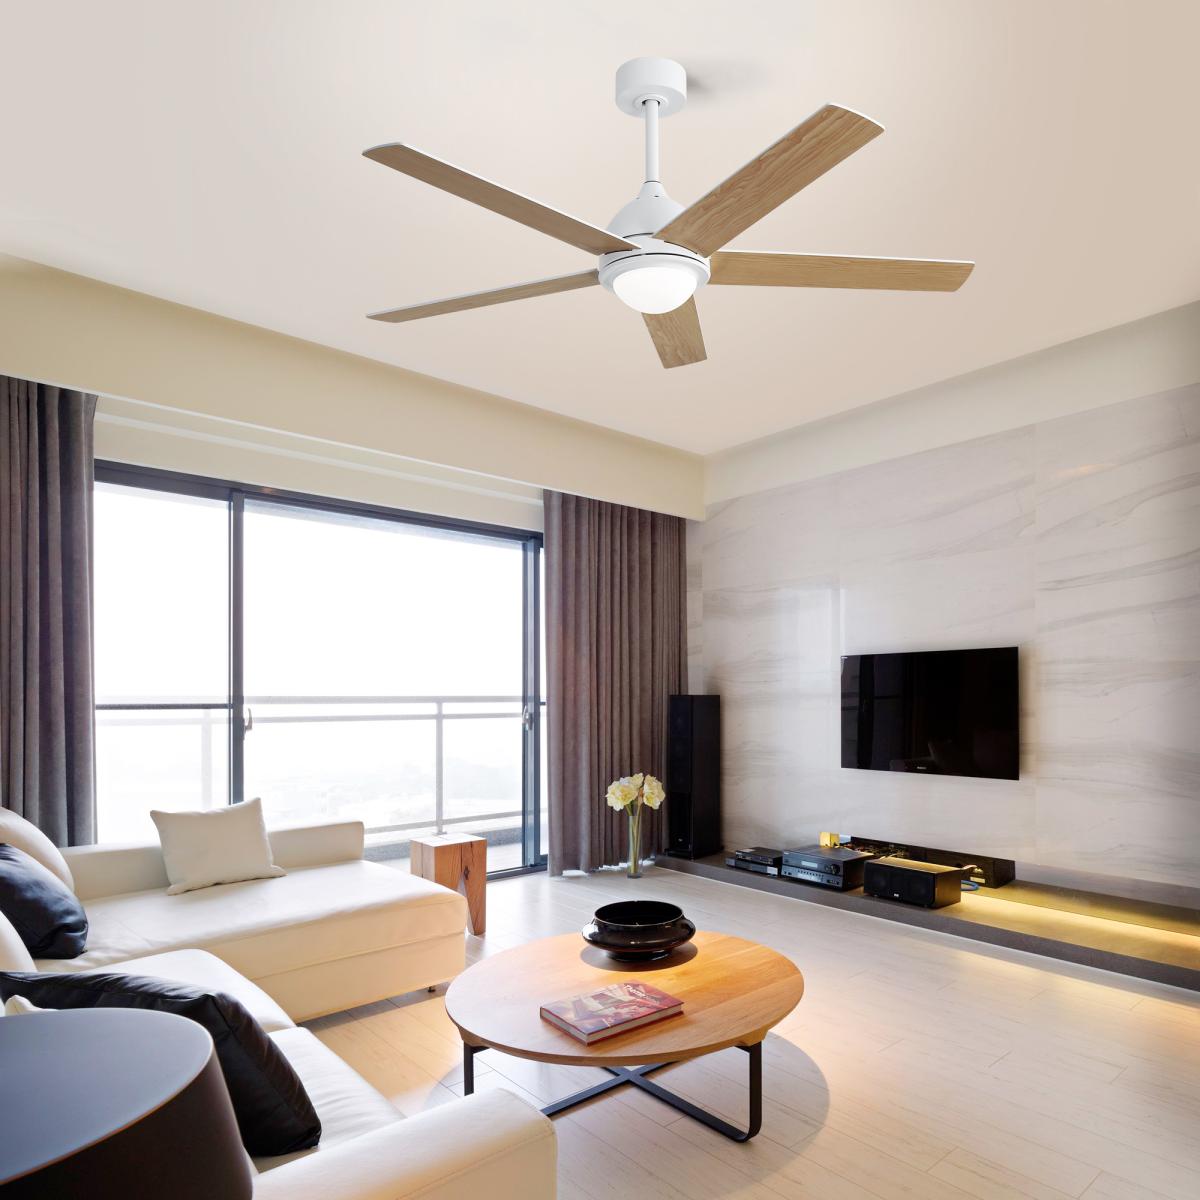 52 Inch Modern Ceiling Fan With 3 Speed Wind 5 Plywood Blades Remote Control Ac Motor With Light